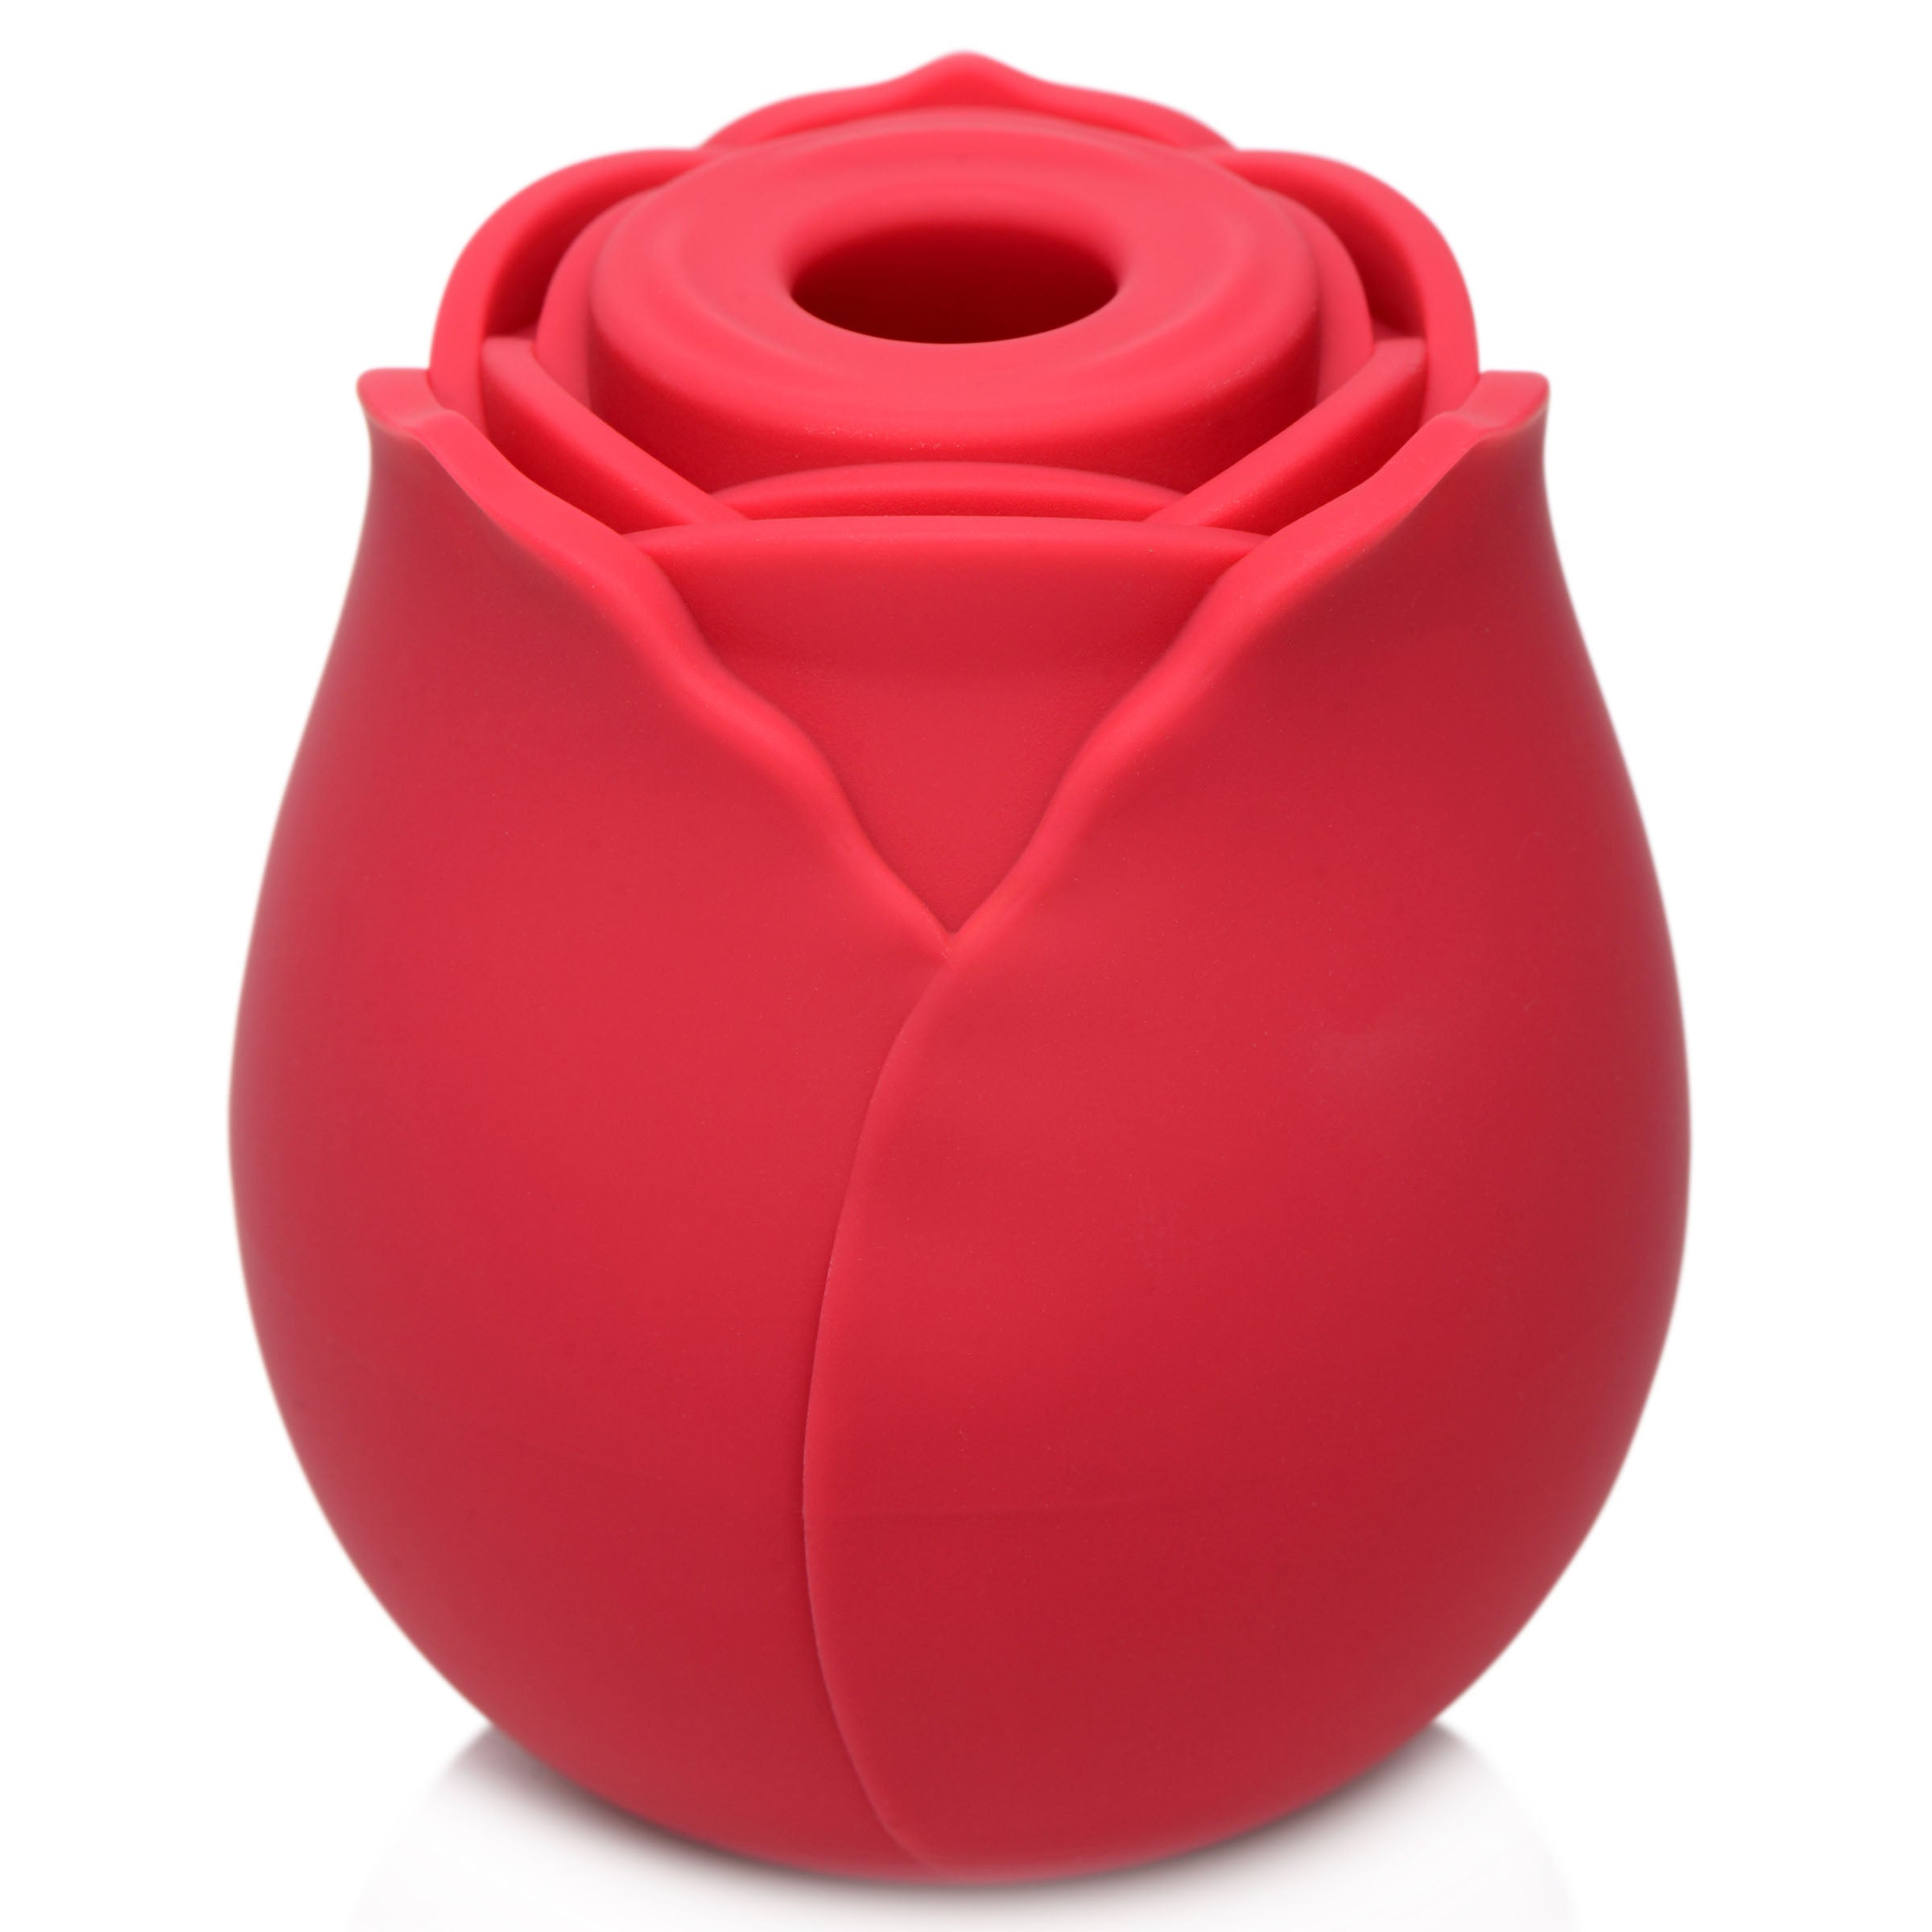 The Rose Lover's Gift Box 10X Clit Suction Rose - Red